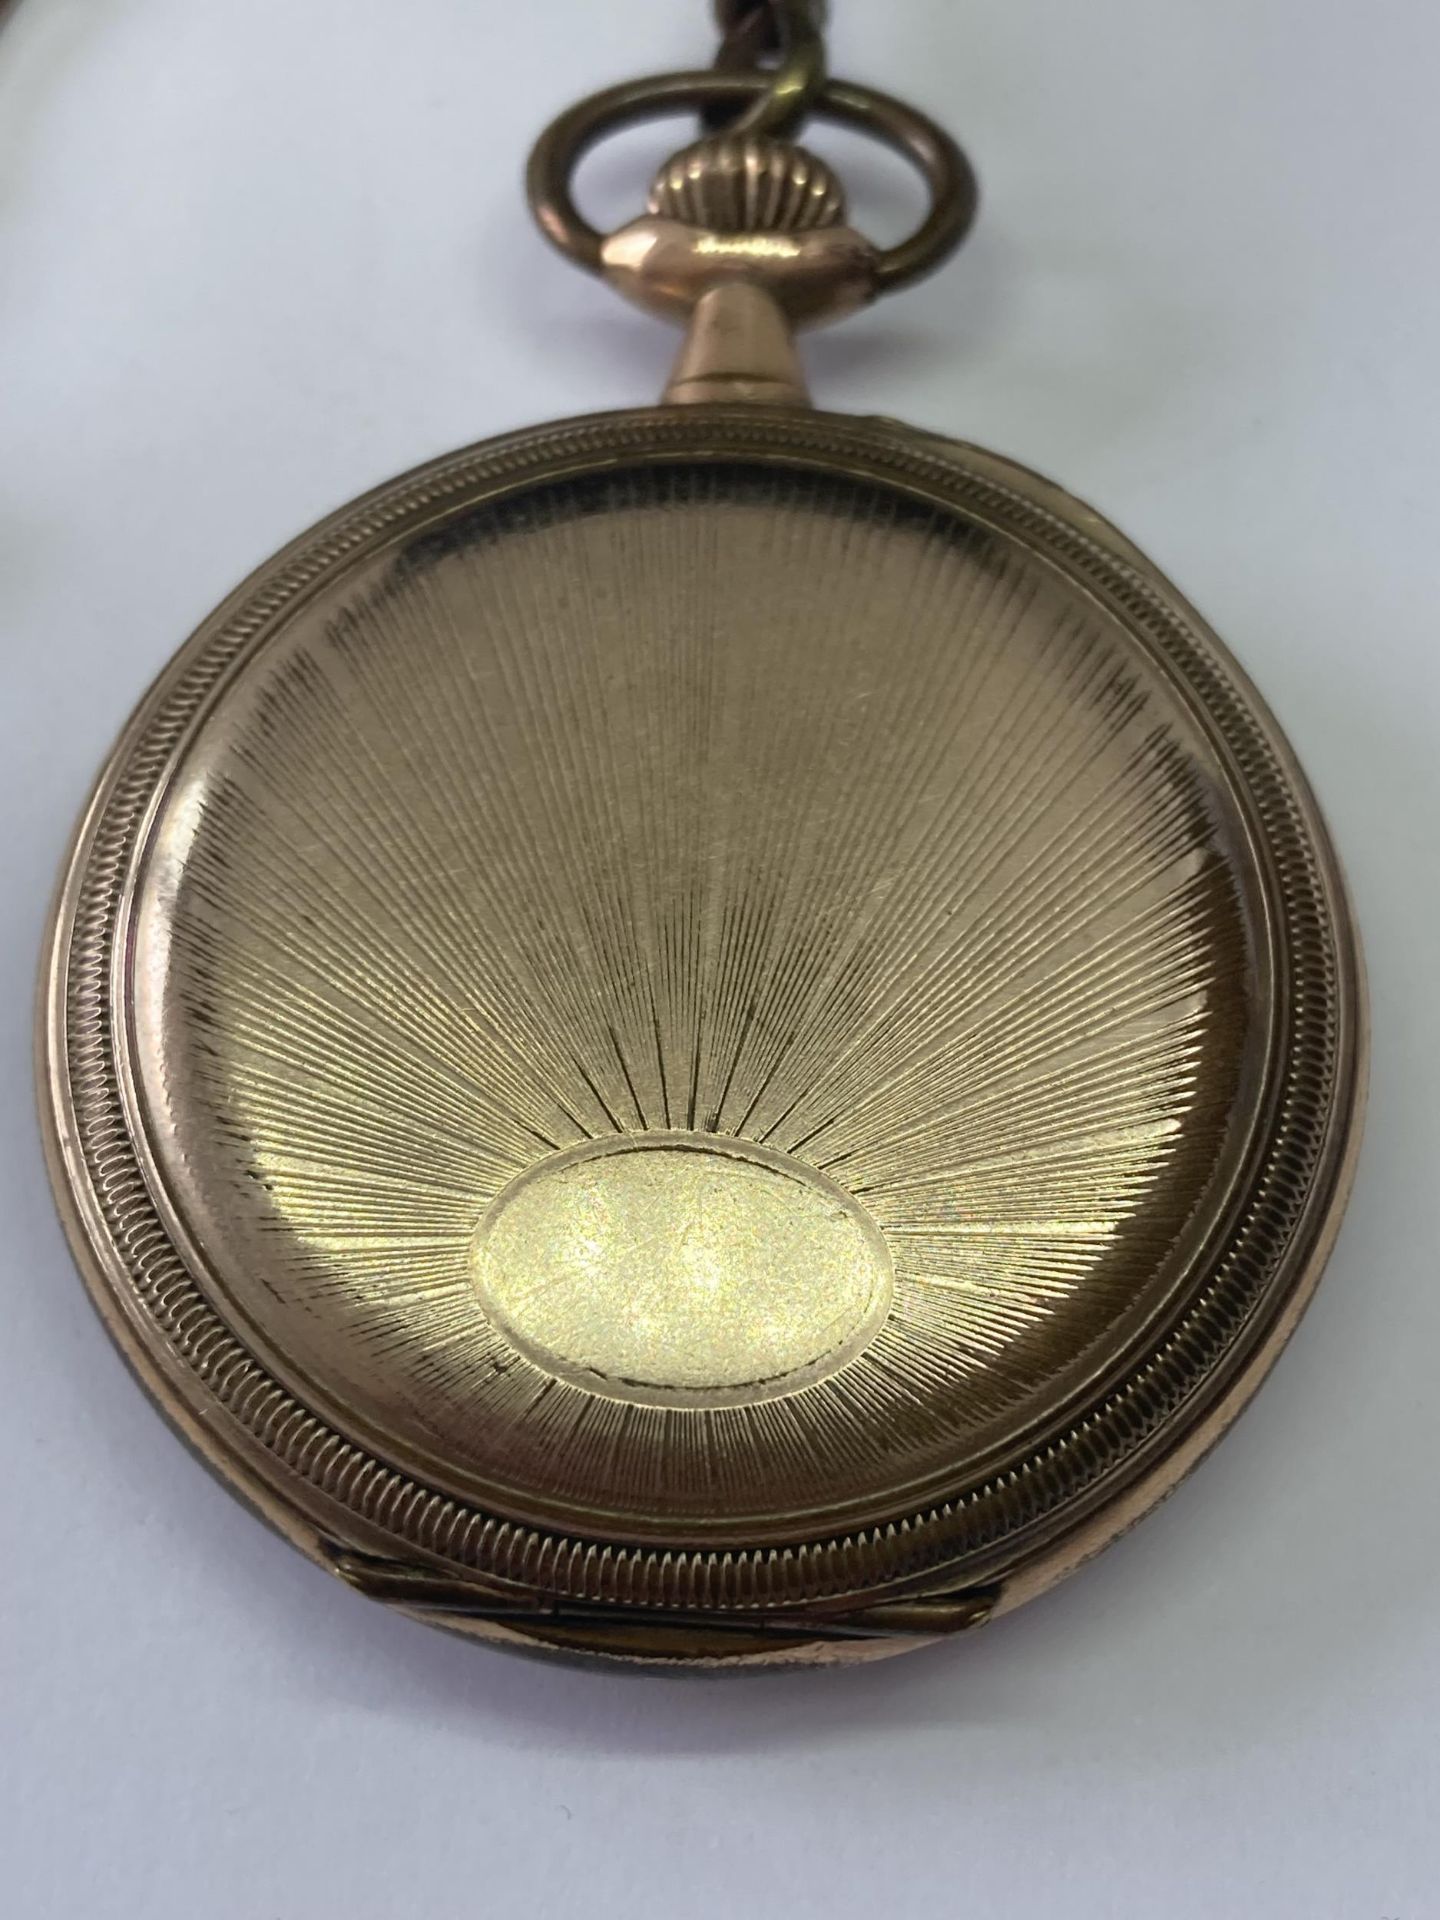 A GOLD PLATED POCKET WATCH WITH CHAIN - Image 3 of 3